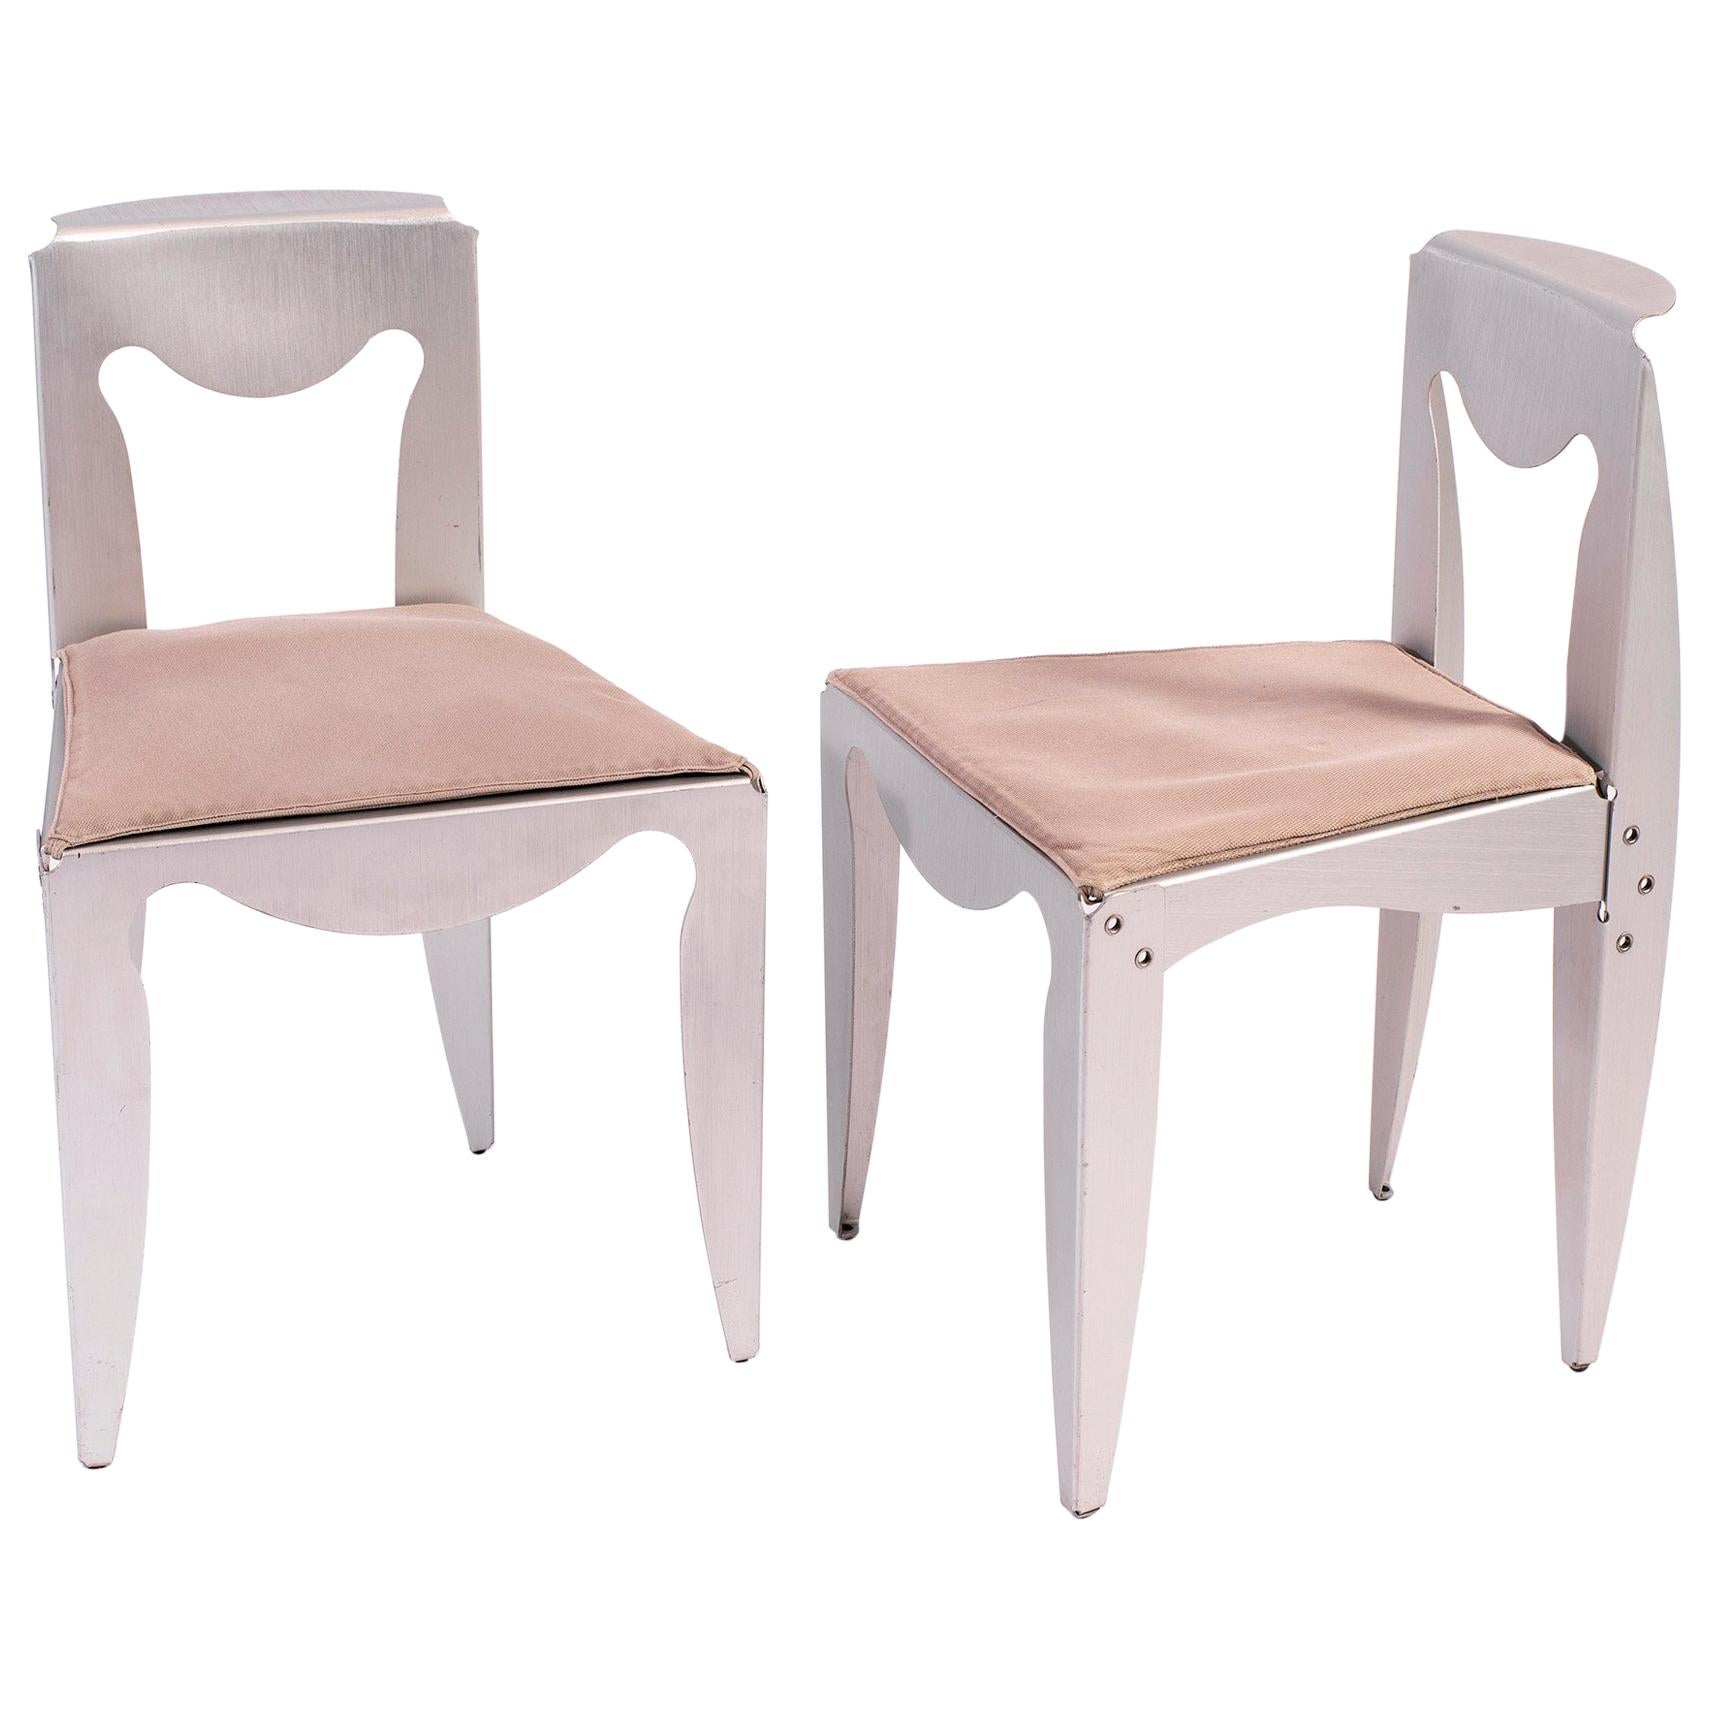 Set of Two “Liberta” Chairs by Afra & Tobia Scarpa for Meritalia, Italy, 1989 For Sale